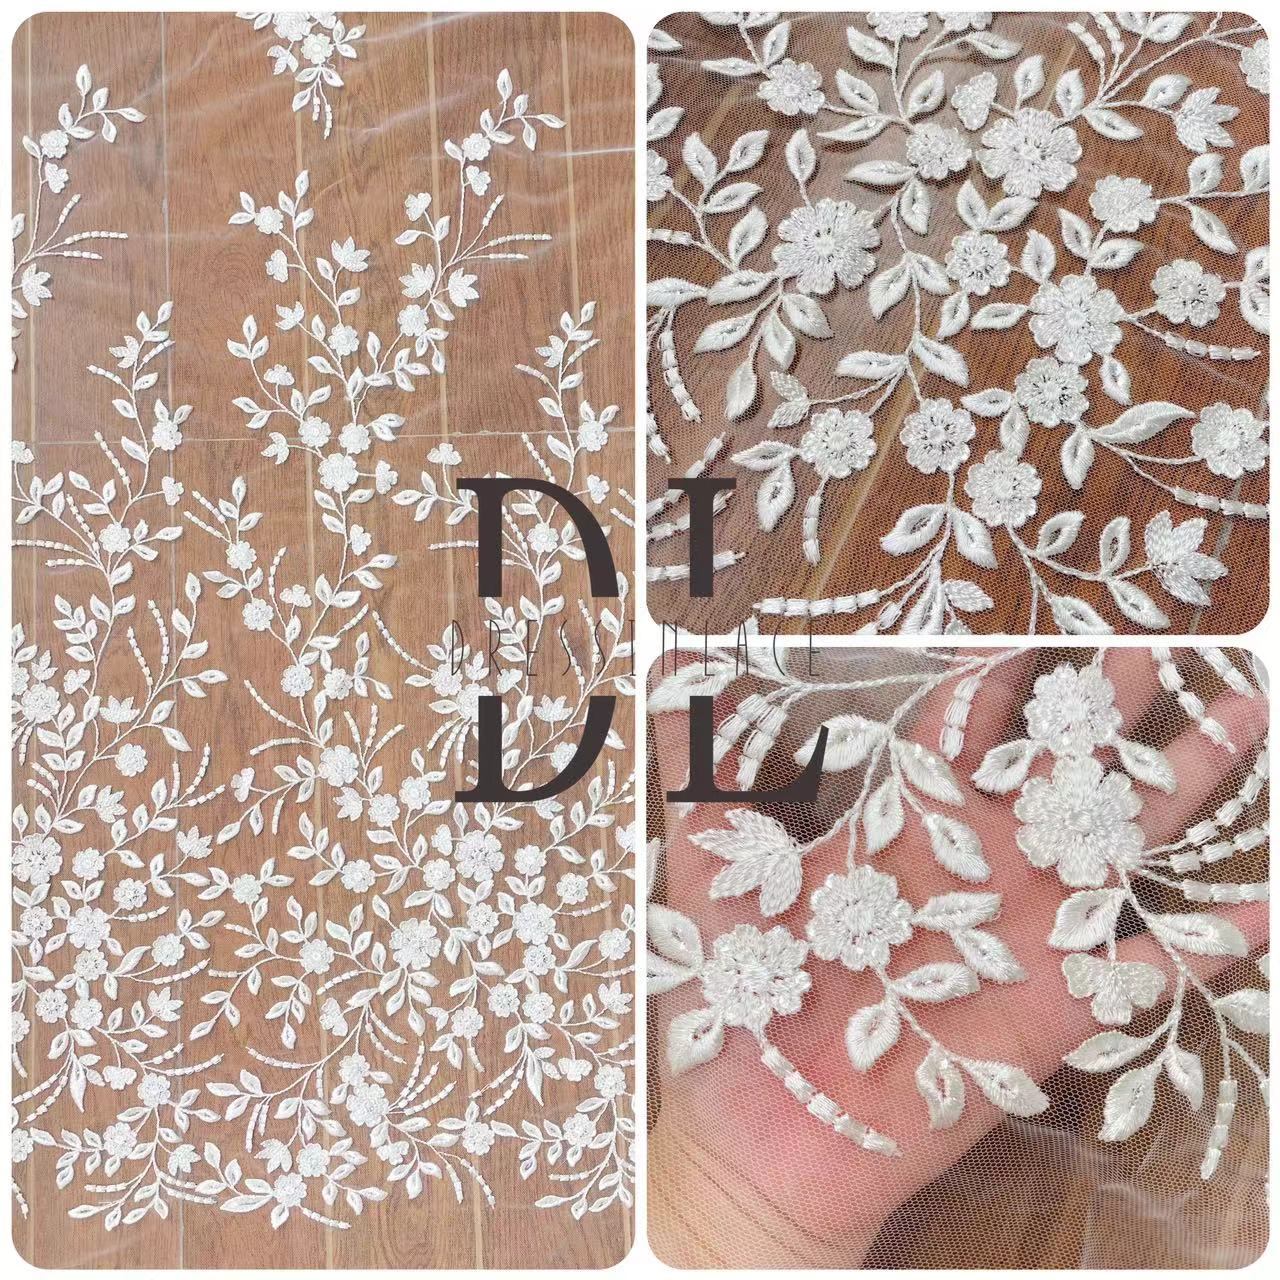 DL130044 Elegant Embroidery Lace Fabric with Simple Floral Design and Sparkling Sequins DL130044